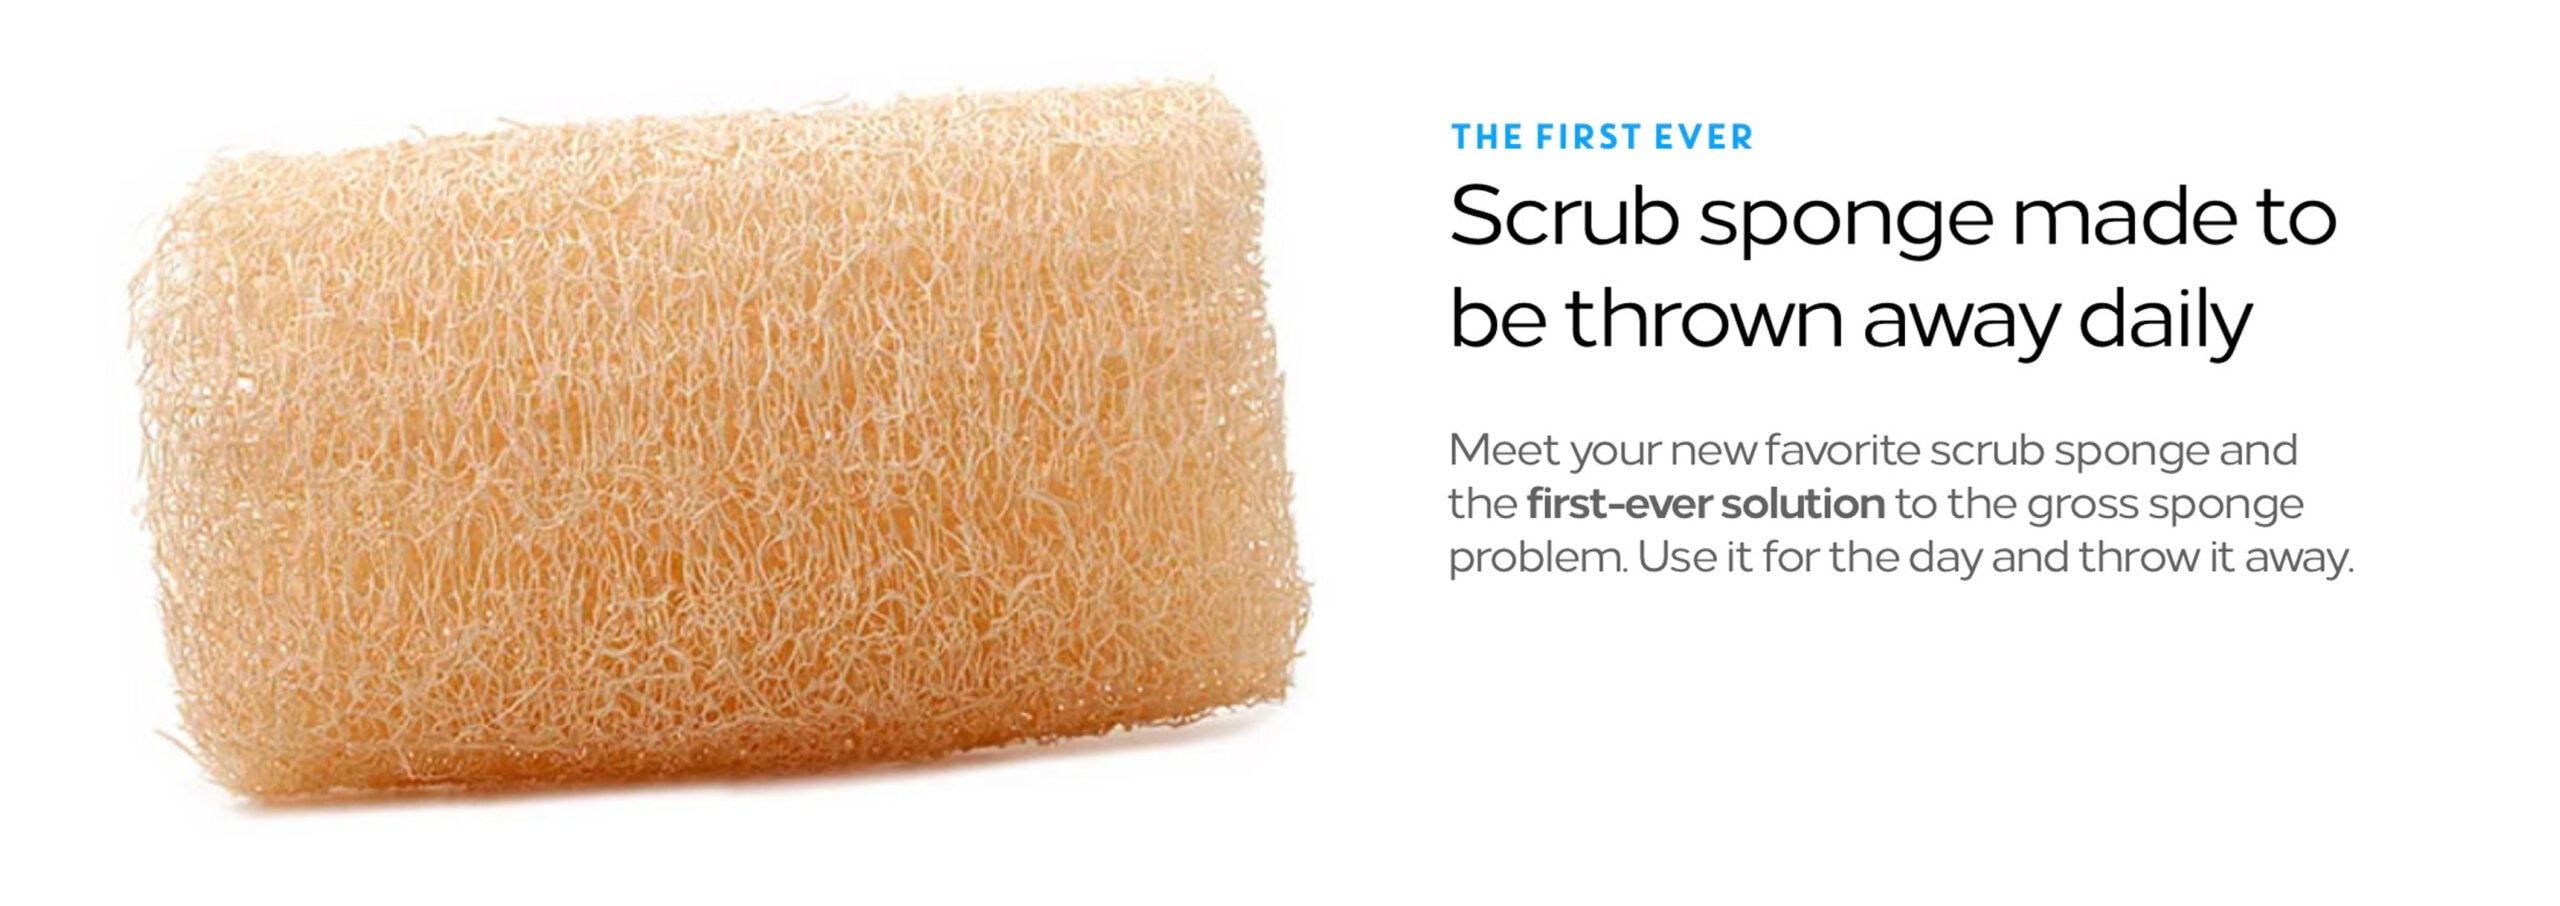 https://mostlovelythings.com/wp-content/uploads/2021/07/scrub-and-throw-sponges-scaled.jpg